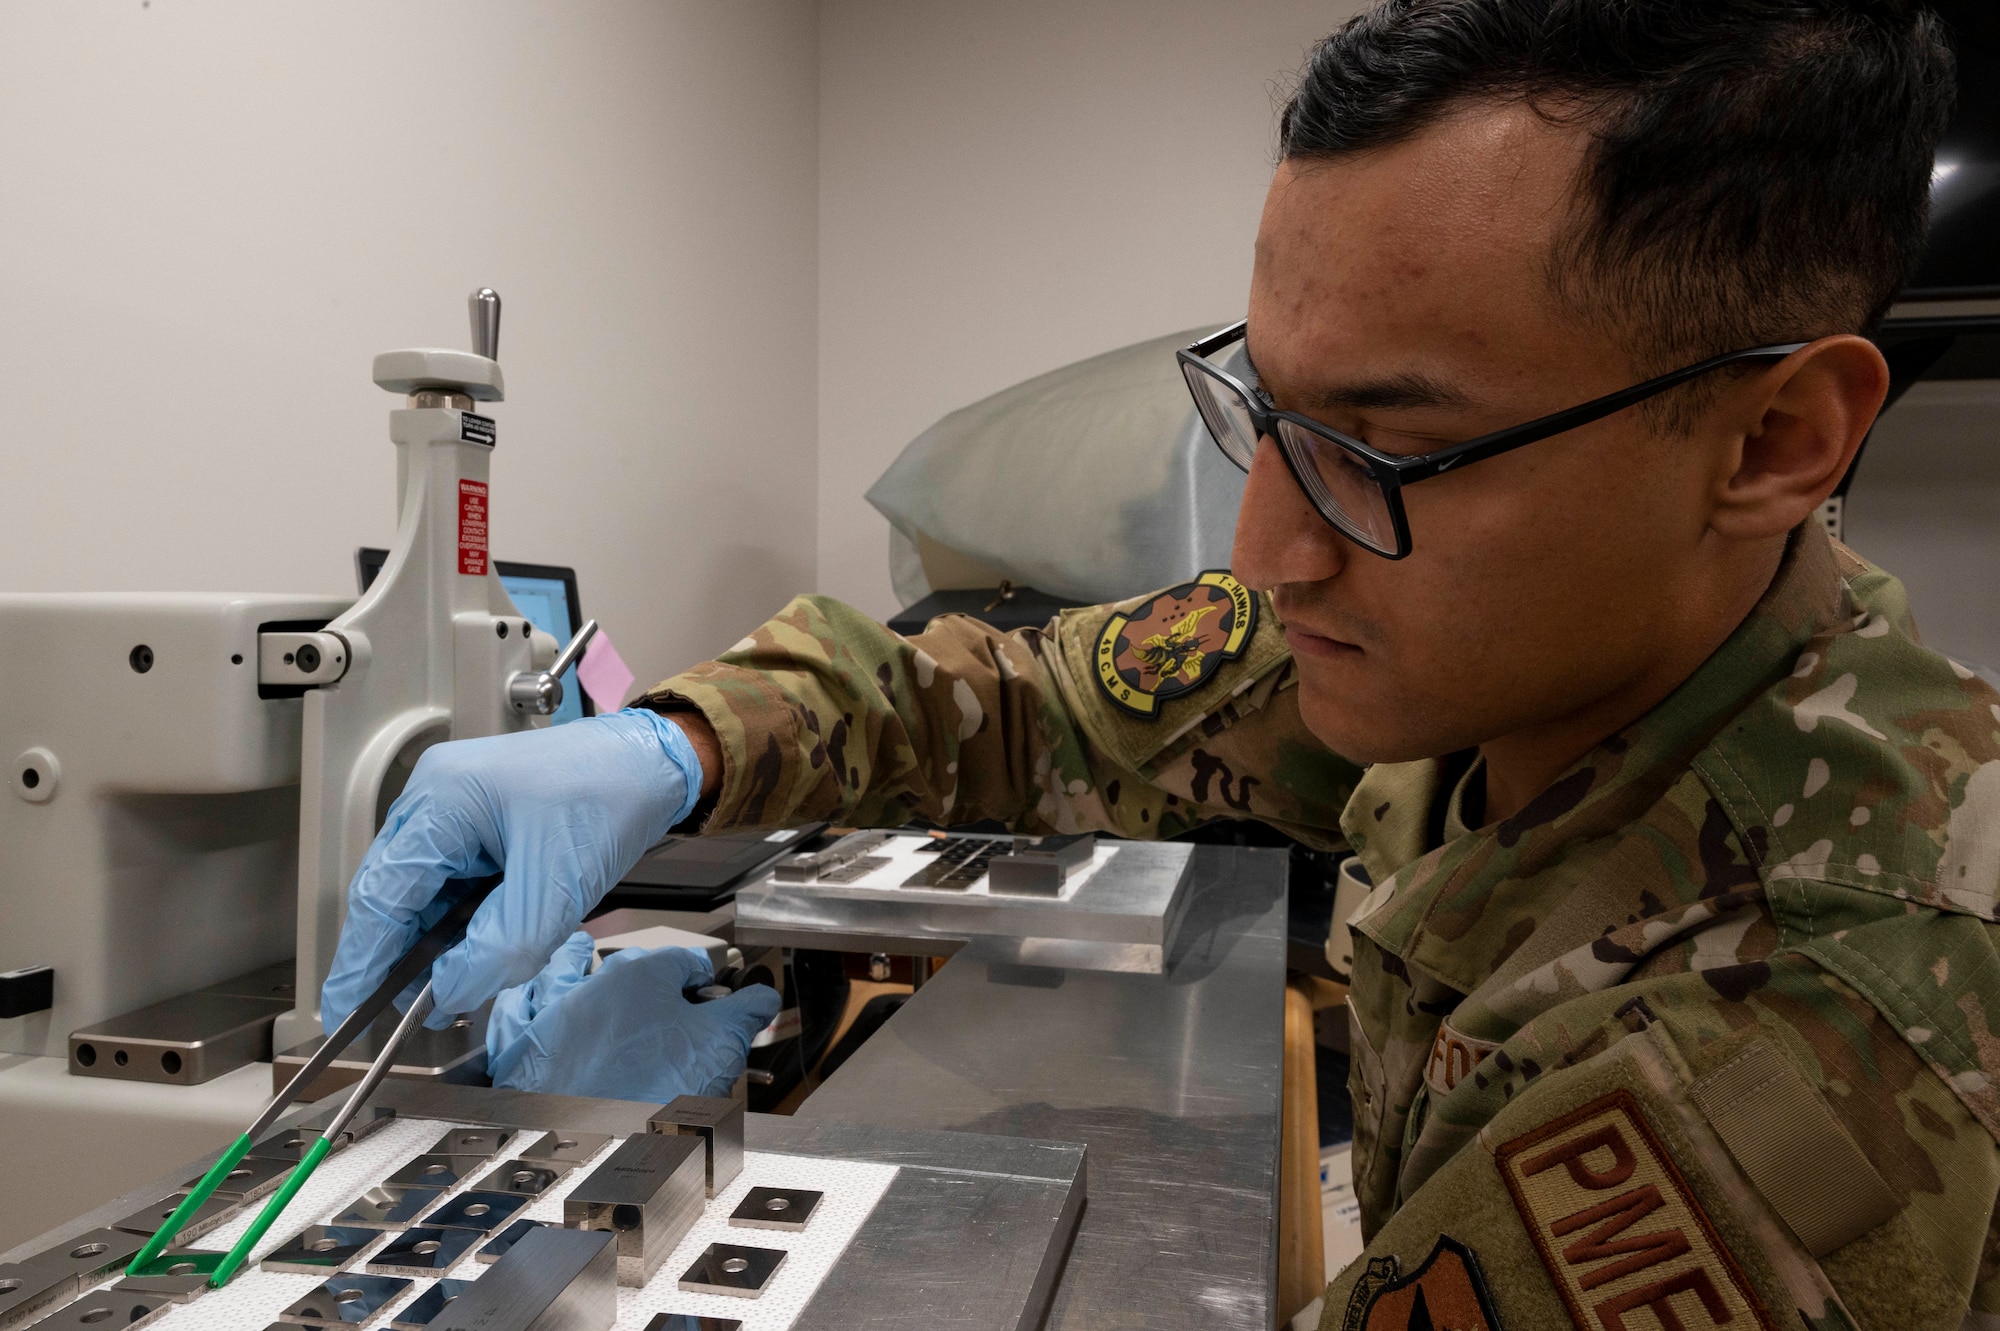 U.S. Air Force Airman 1st Class Gustavo Gaytan, 49th Component Maintenance Squadron physical dimensional technician, measures gauge blocks by using a gauge block comparator at Holloman Air Force Base, New Mexico, Jan. 6, 2023.